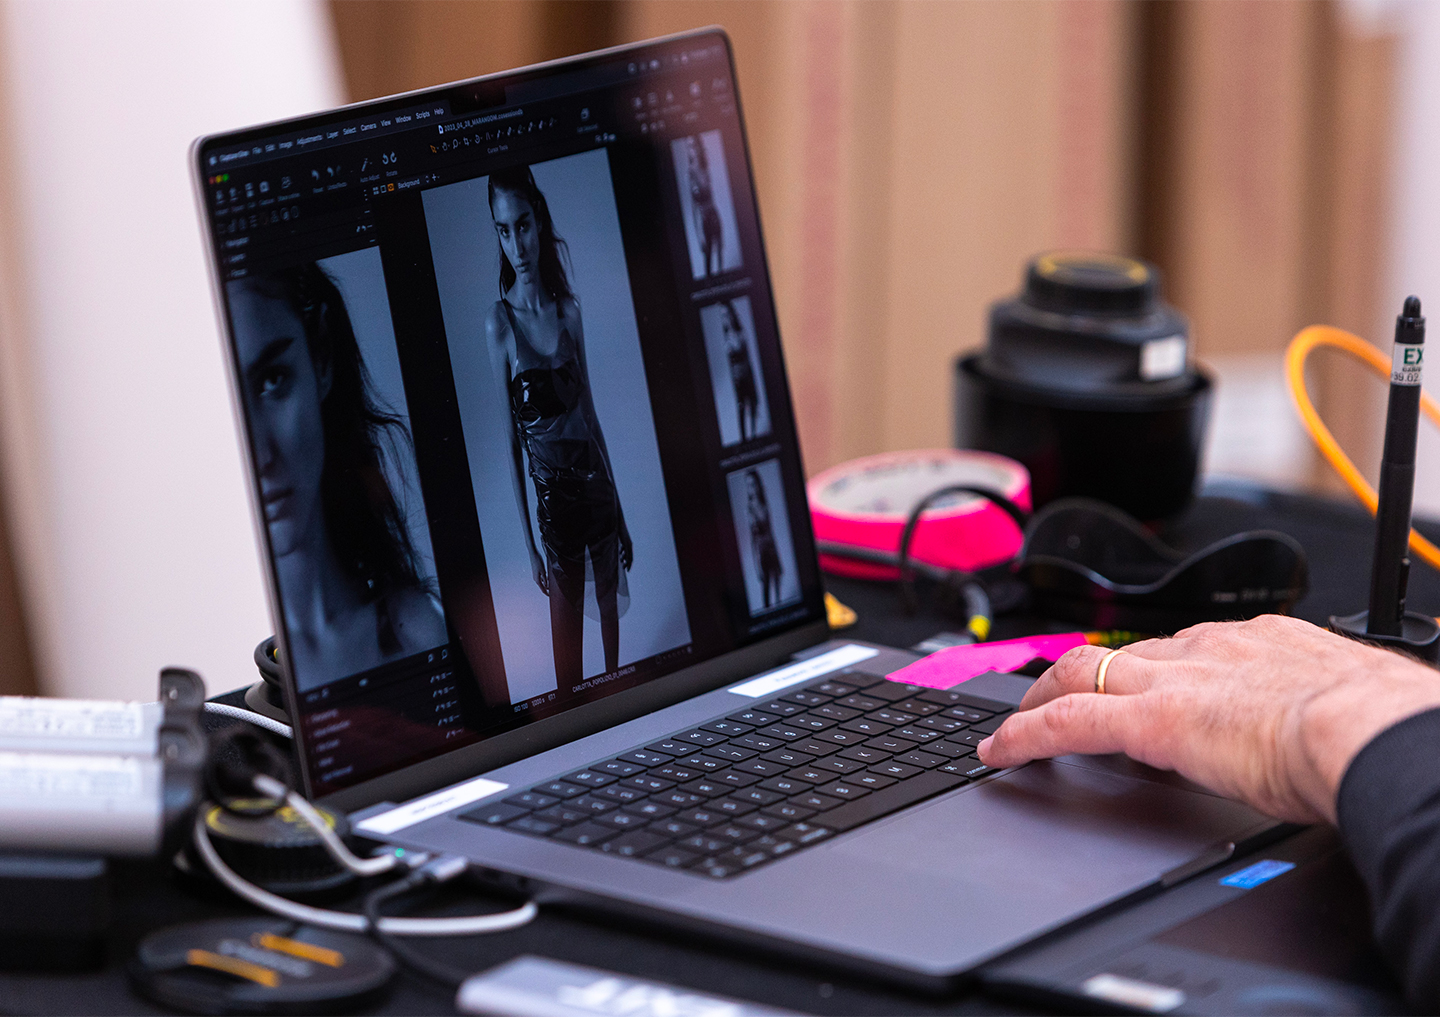 A backstage moment from the shoot by Istituto Marangoni Fashion Styling Masters student Carlotta Popolizio